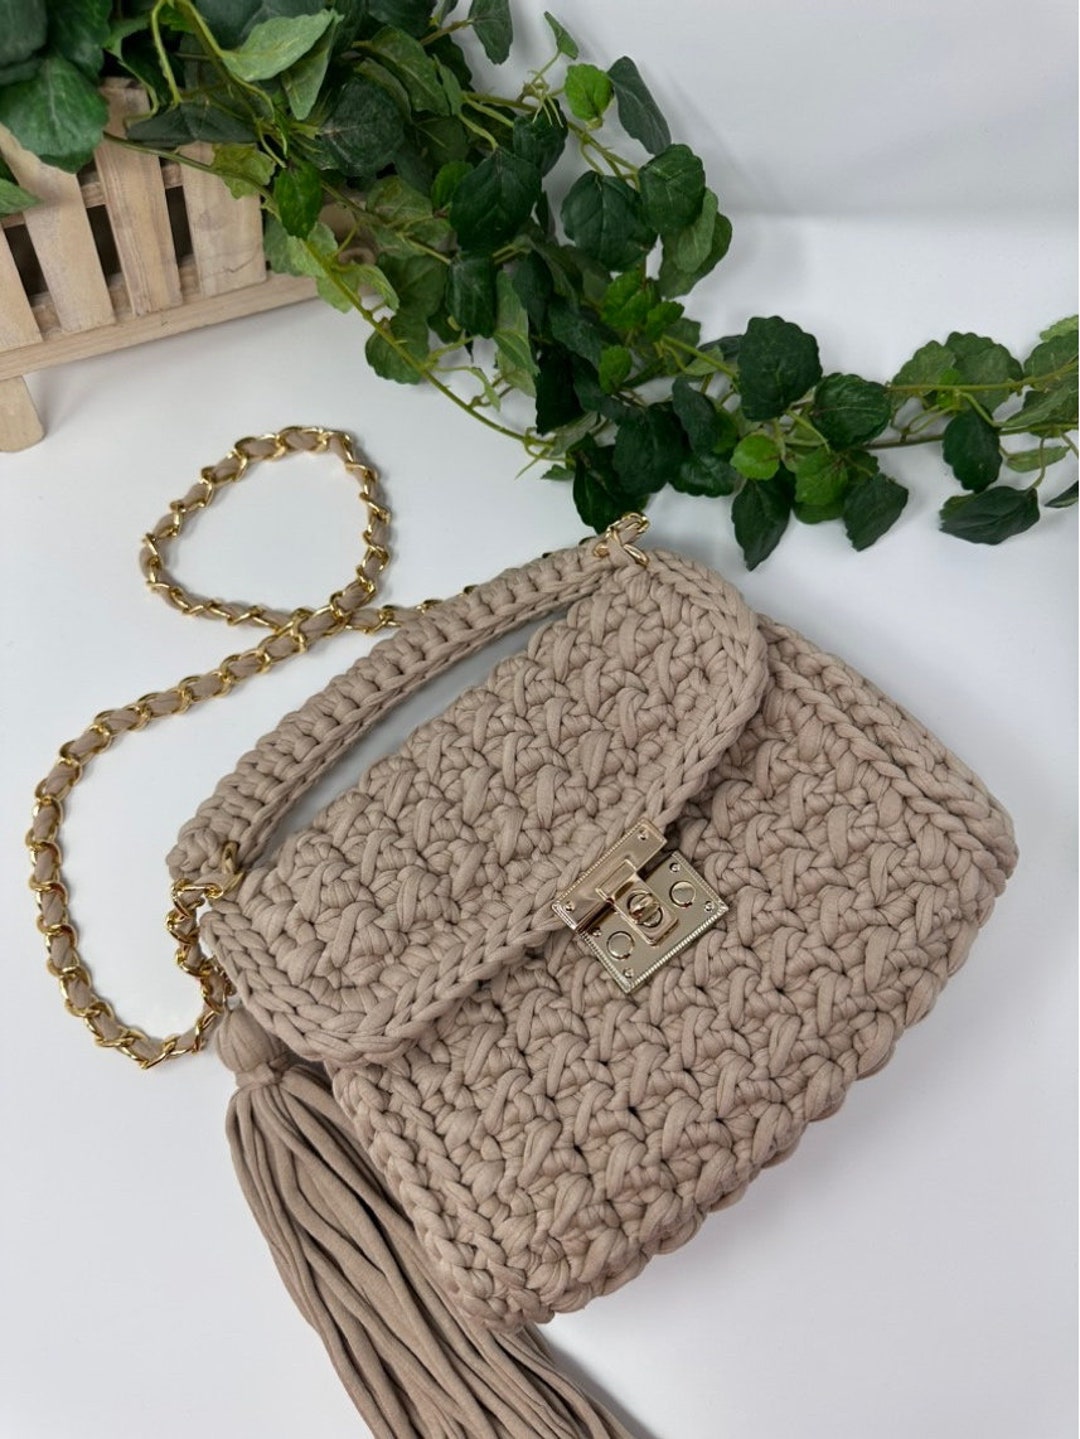 The Beige Knotted Handbag/multi Color Bag/hand Woven - Etsy